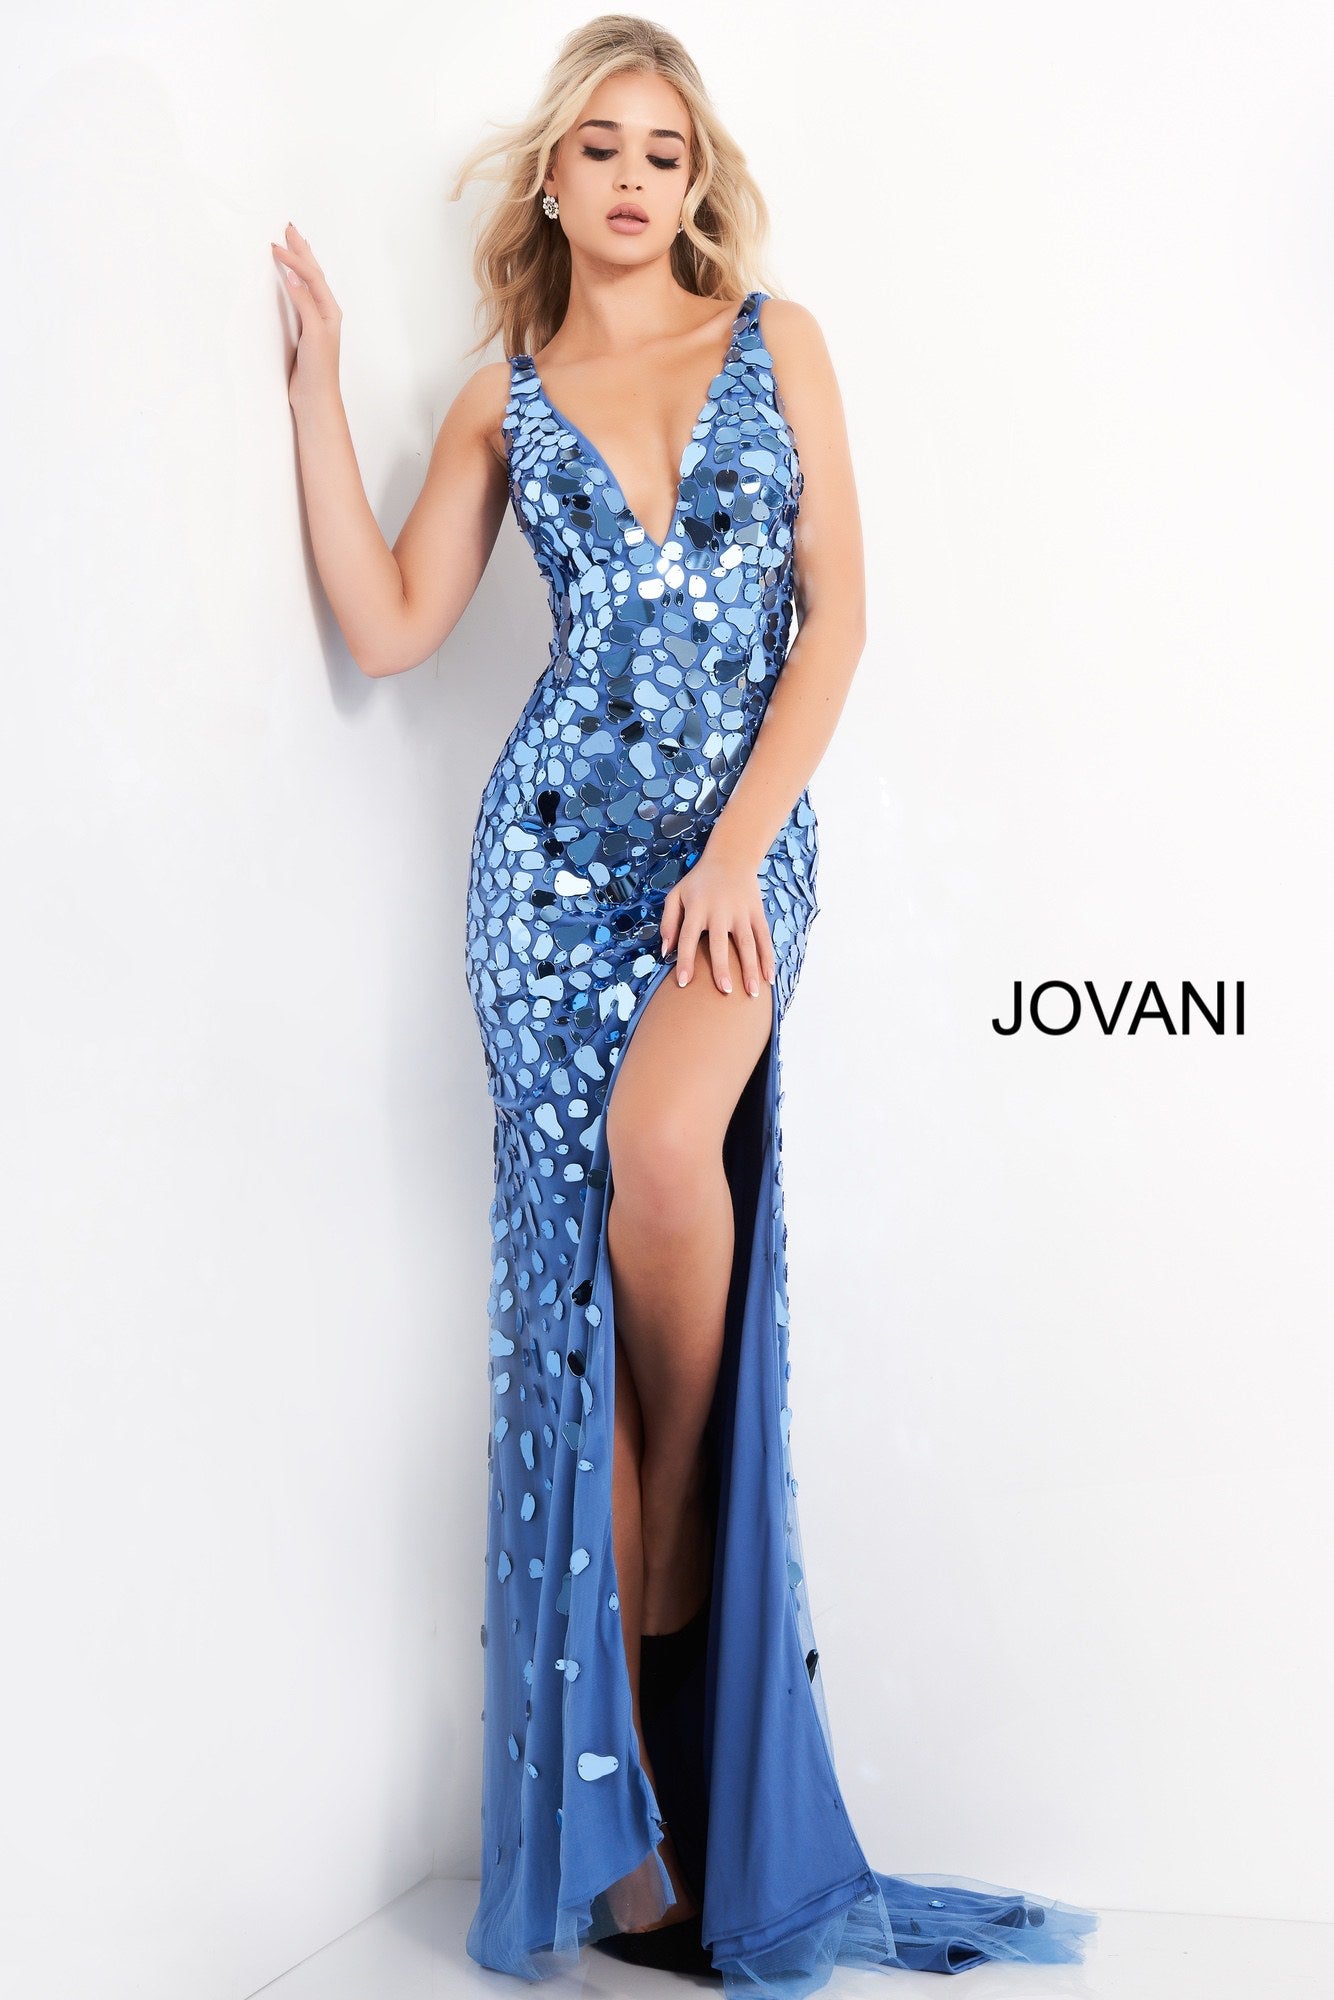 Jovani 02479 is a long sheath silhouette with a high slit. Deep V Neckline with sheer side mesh panels.  Cut Glass Embellishments cluster along the bodice and disperse as they cascade into the nude skirt.  Sexy Evening Gown Flashy Couture Cut Glass Prom & Pageant Dress. Formal Evening Gown.   Available Colors: Emerald, Nude, Perri  Available Sizes: 00-24